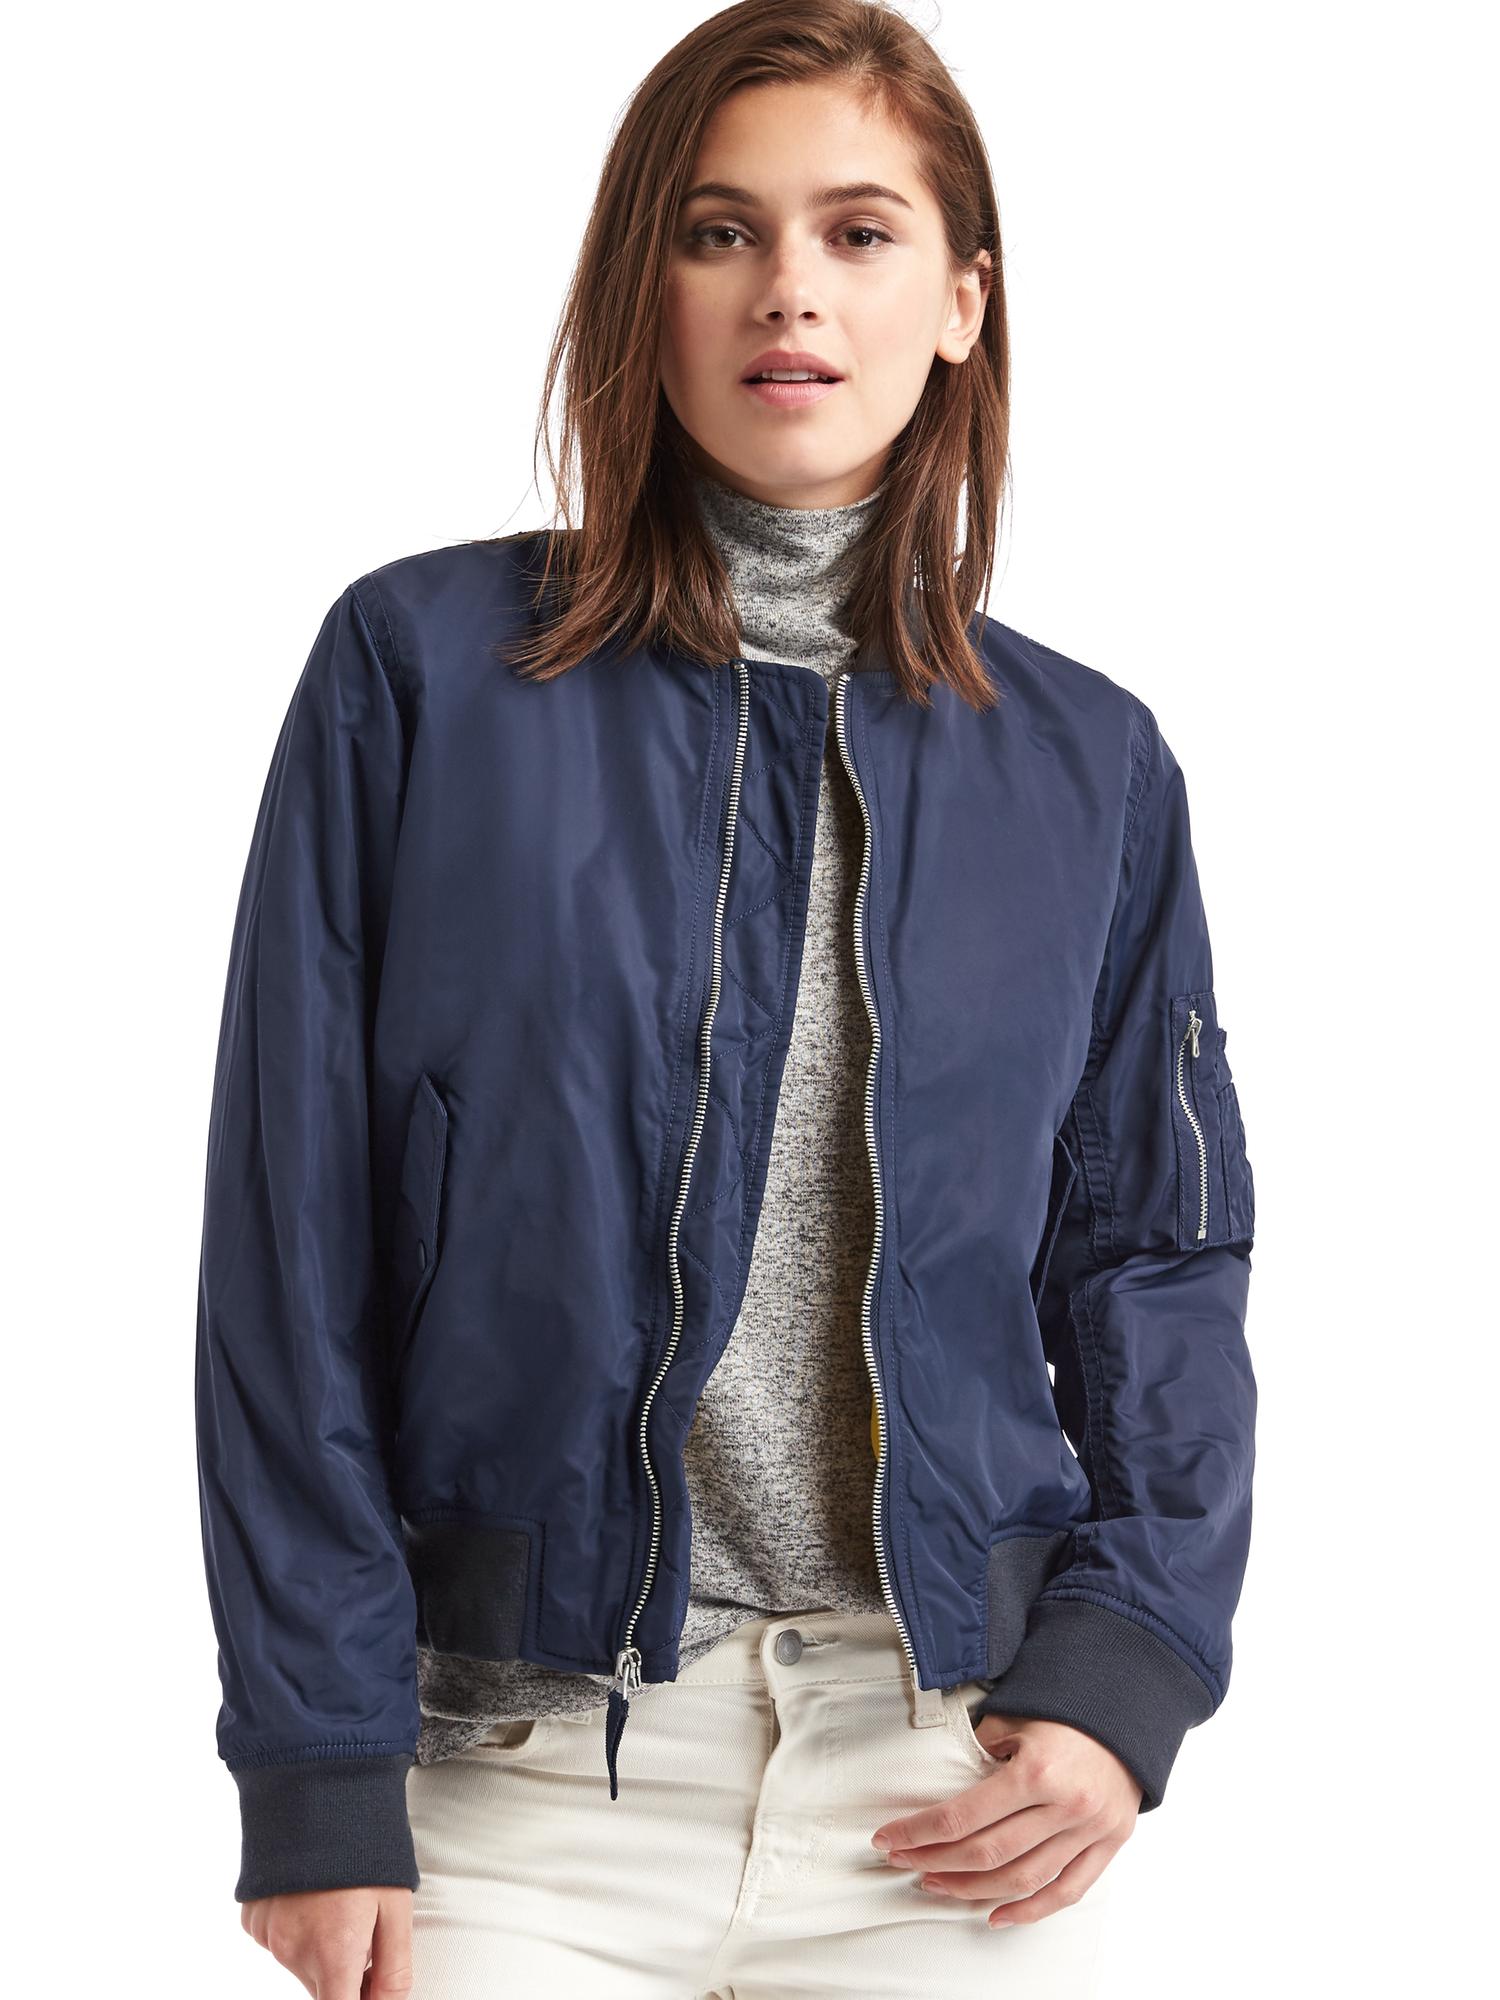 Shop for women&39s outerwear like coats jackets and blazers. | Gap